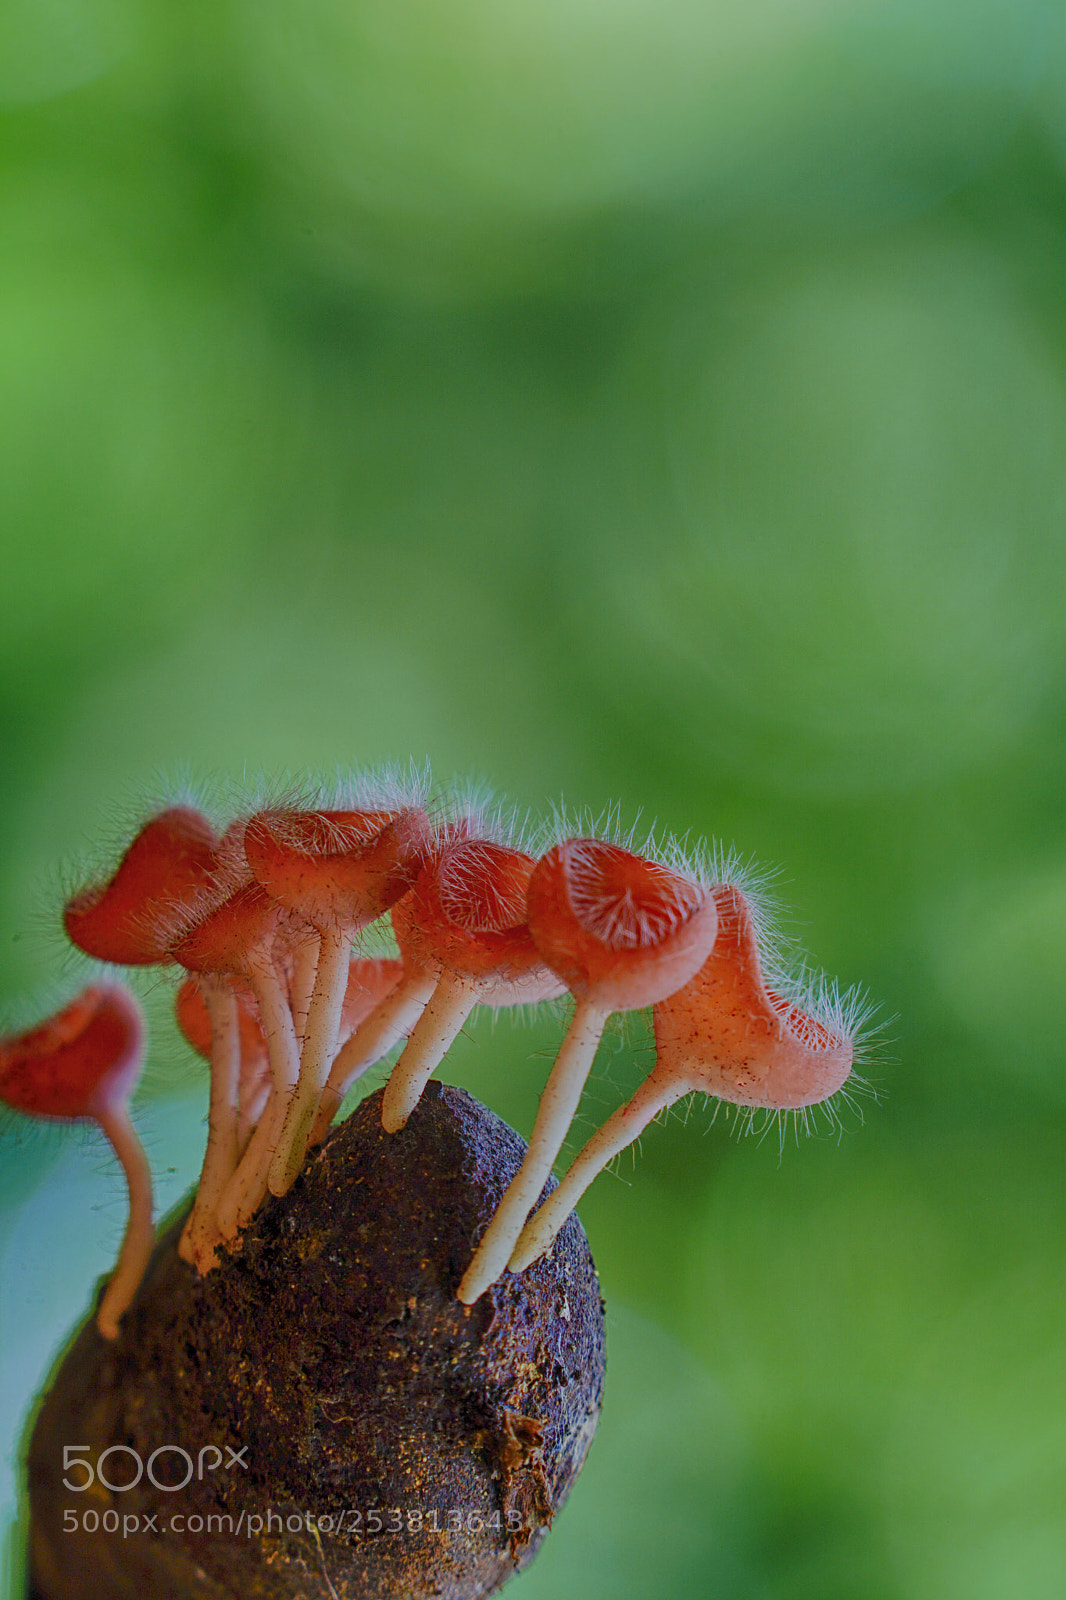 Sony a6000 sample photo. Cup fungus captured in photography